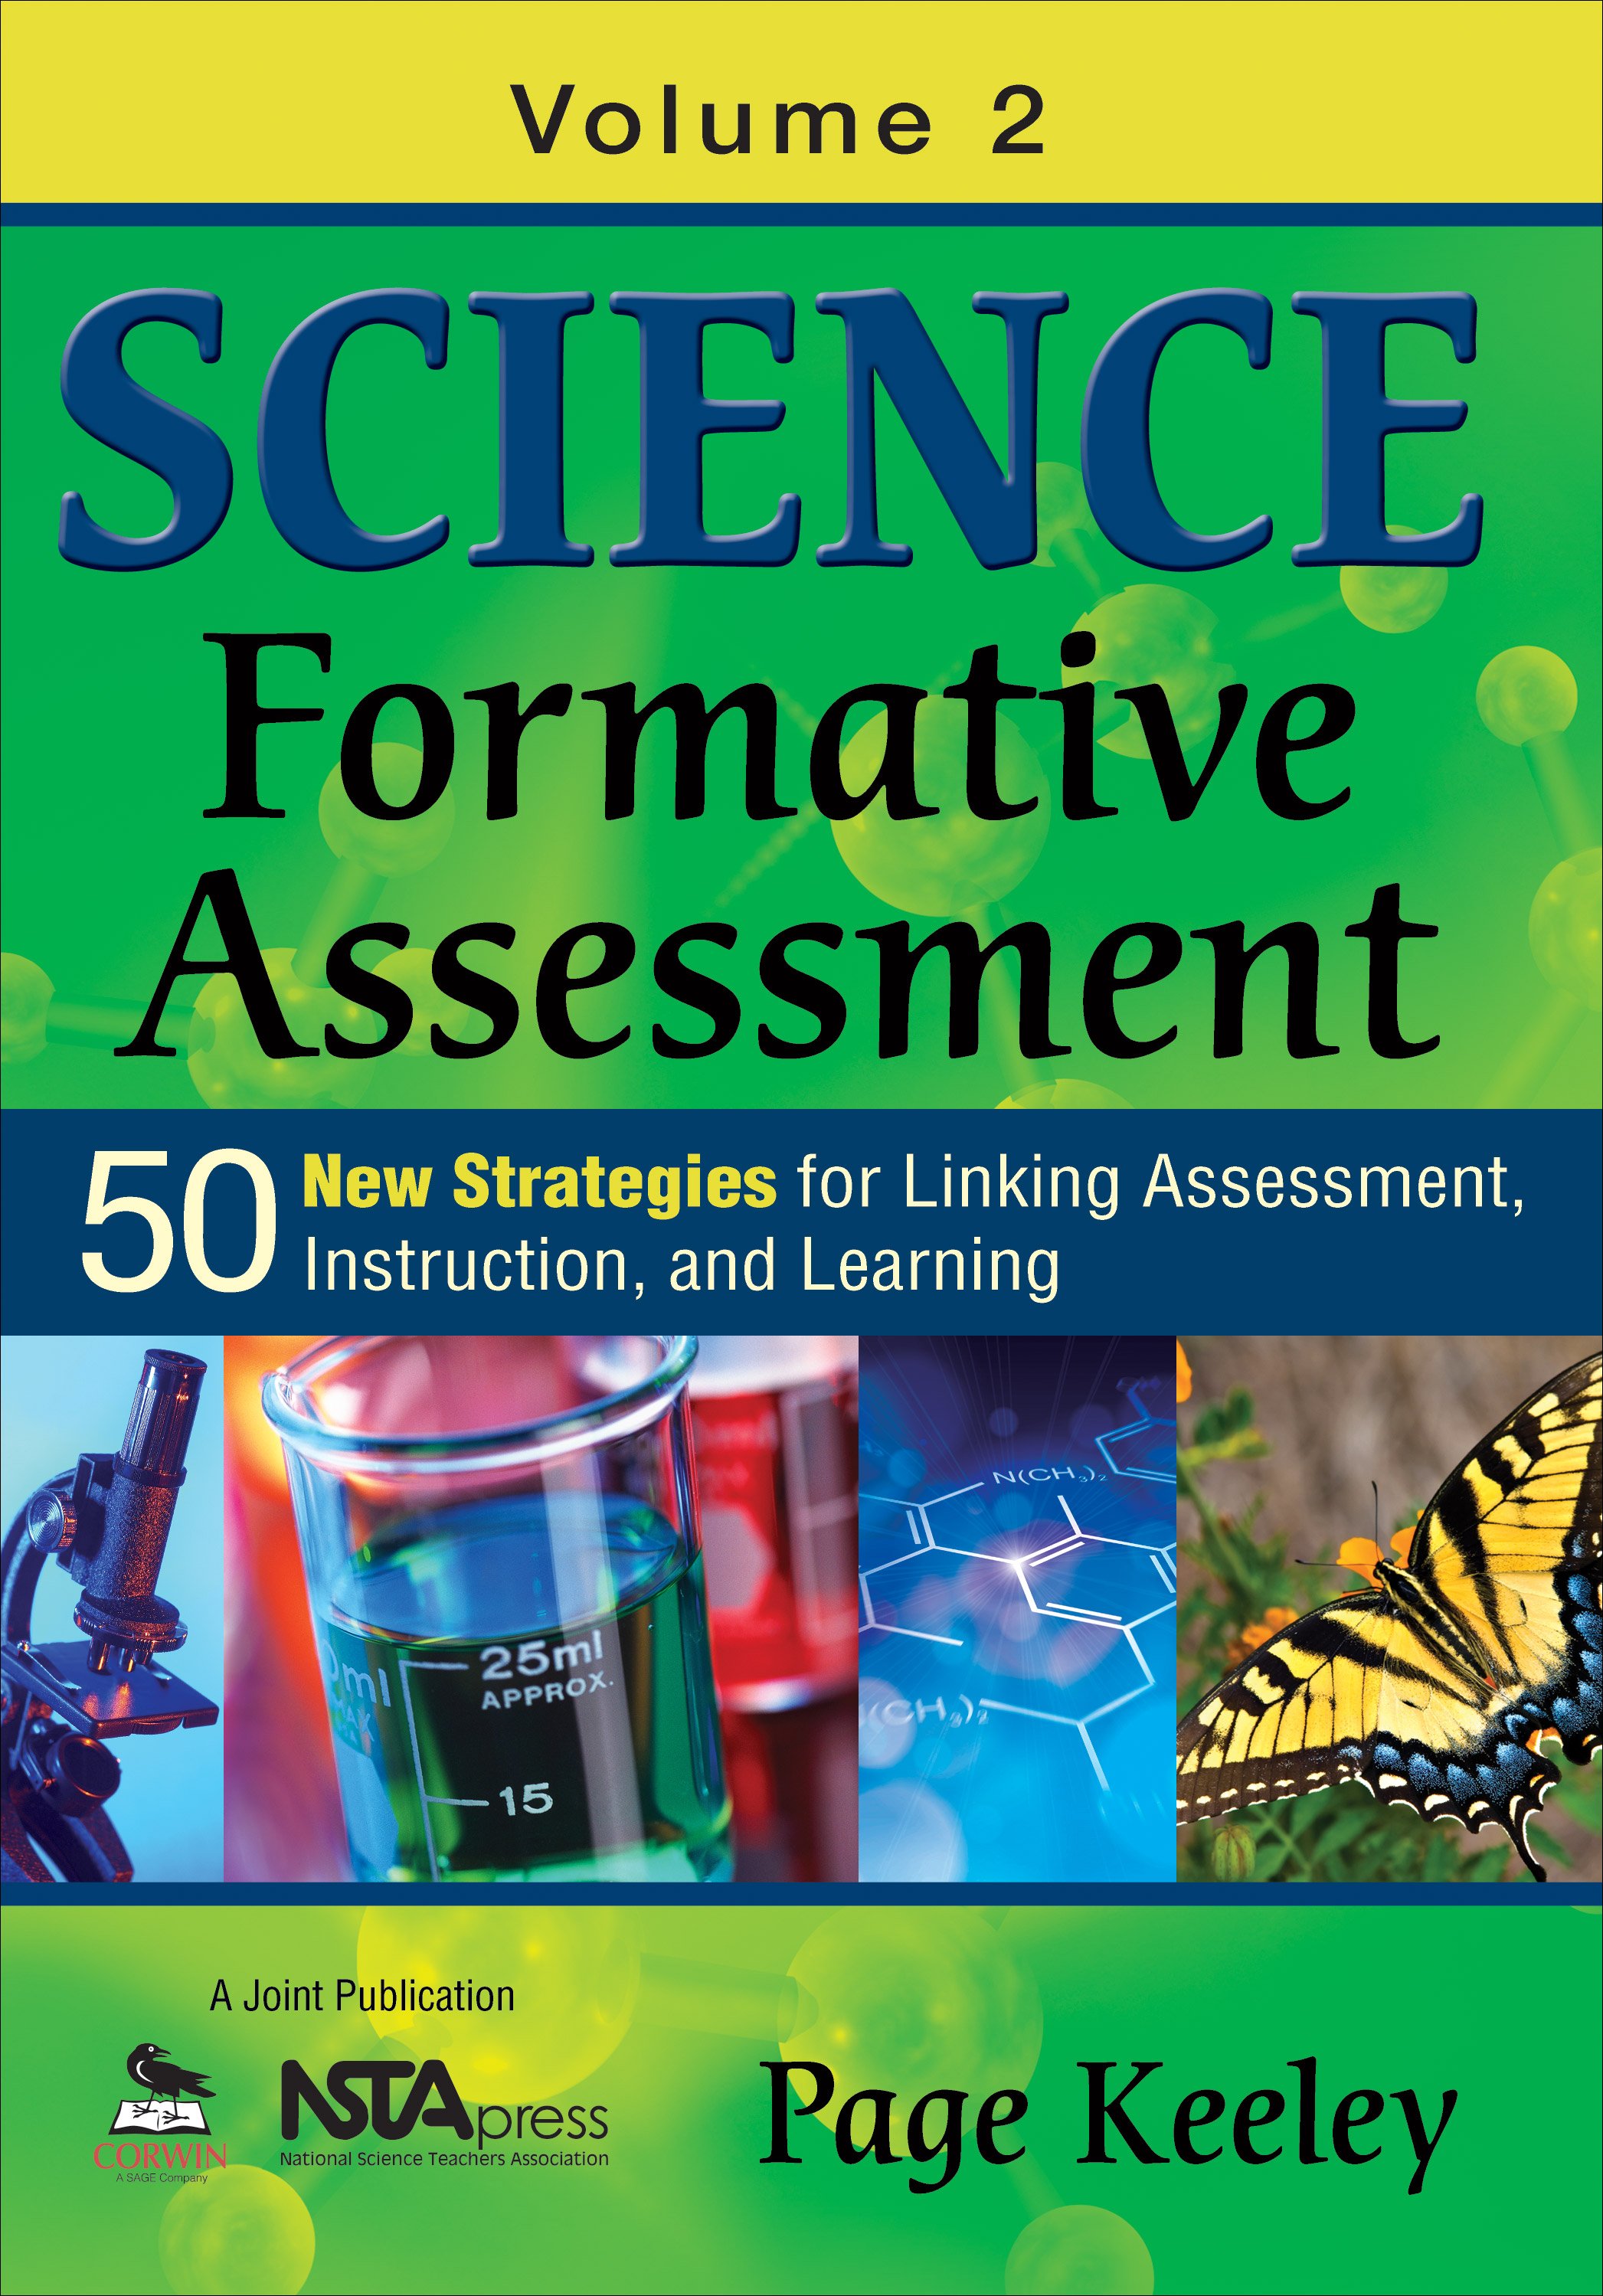 characteristics of formative assessment in science education